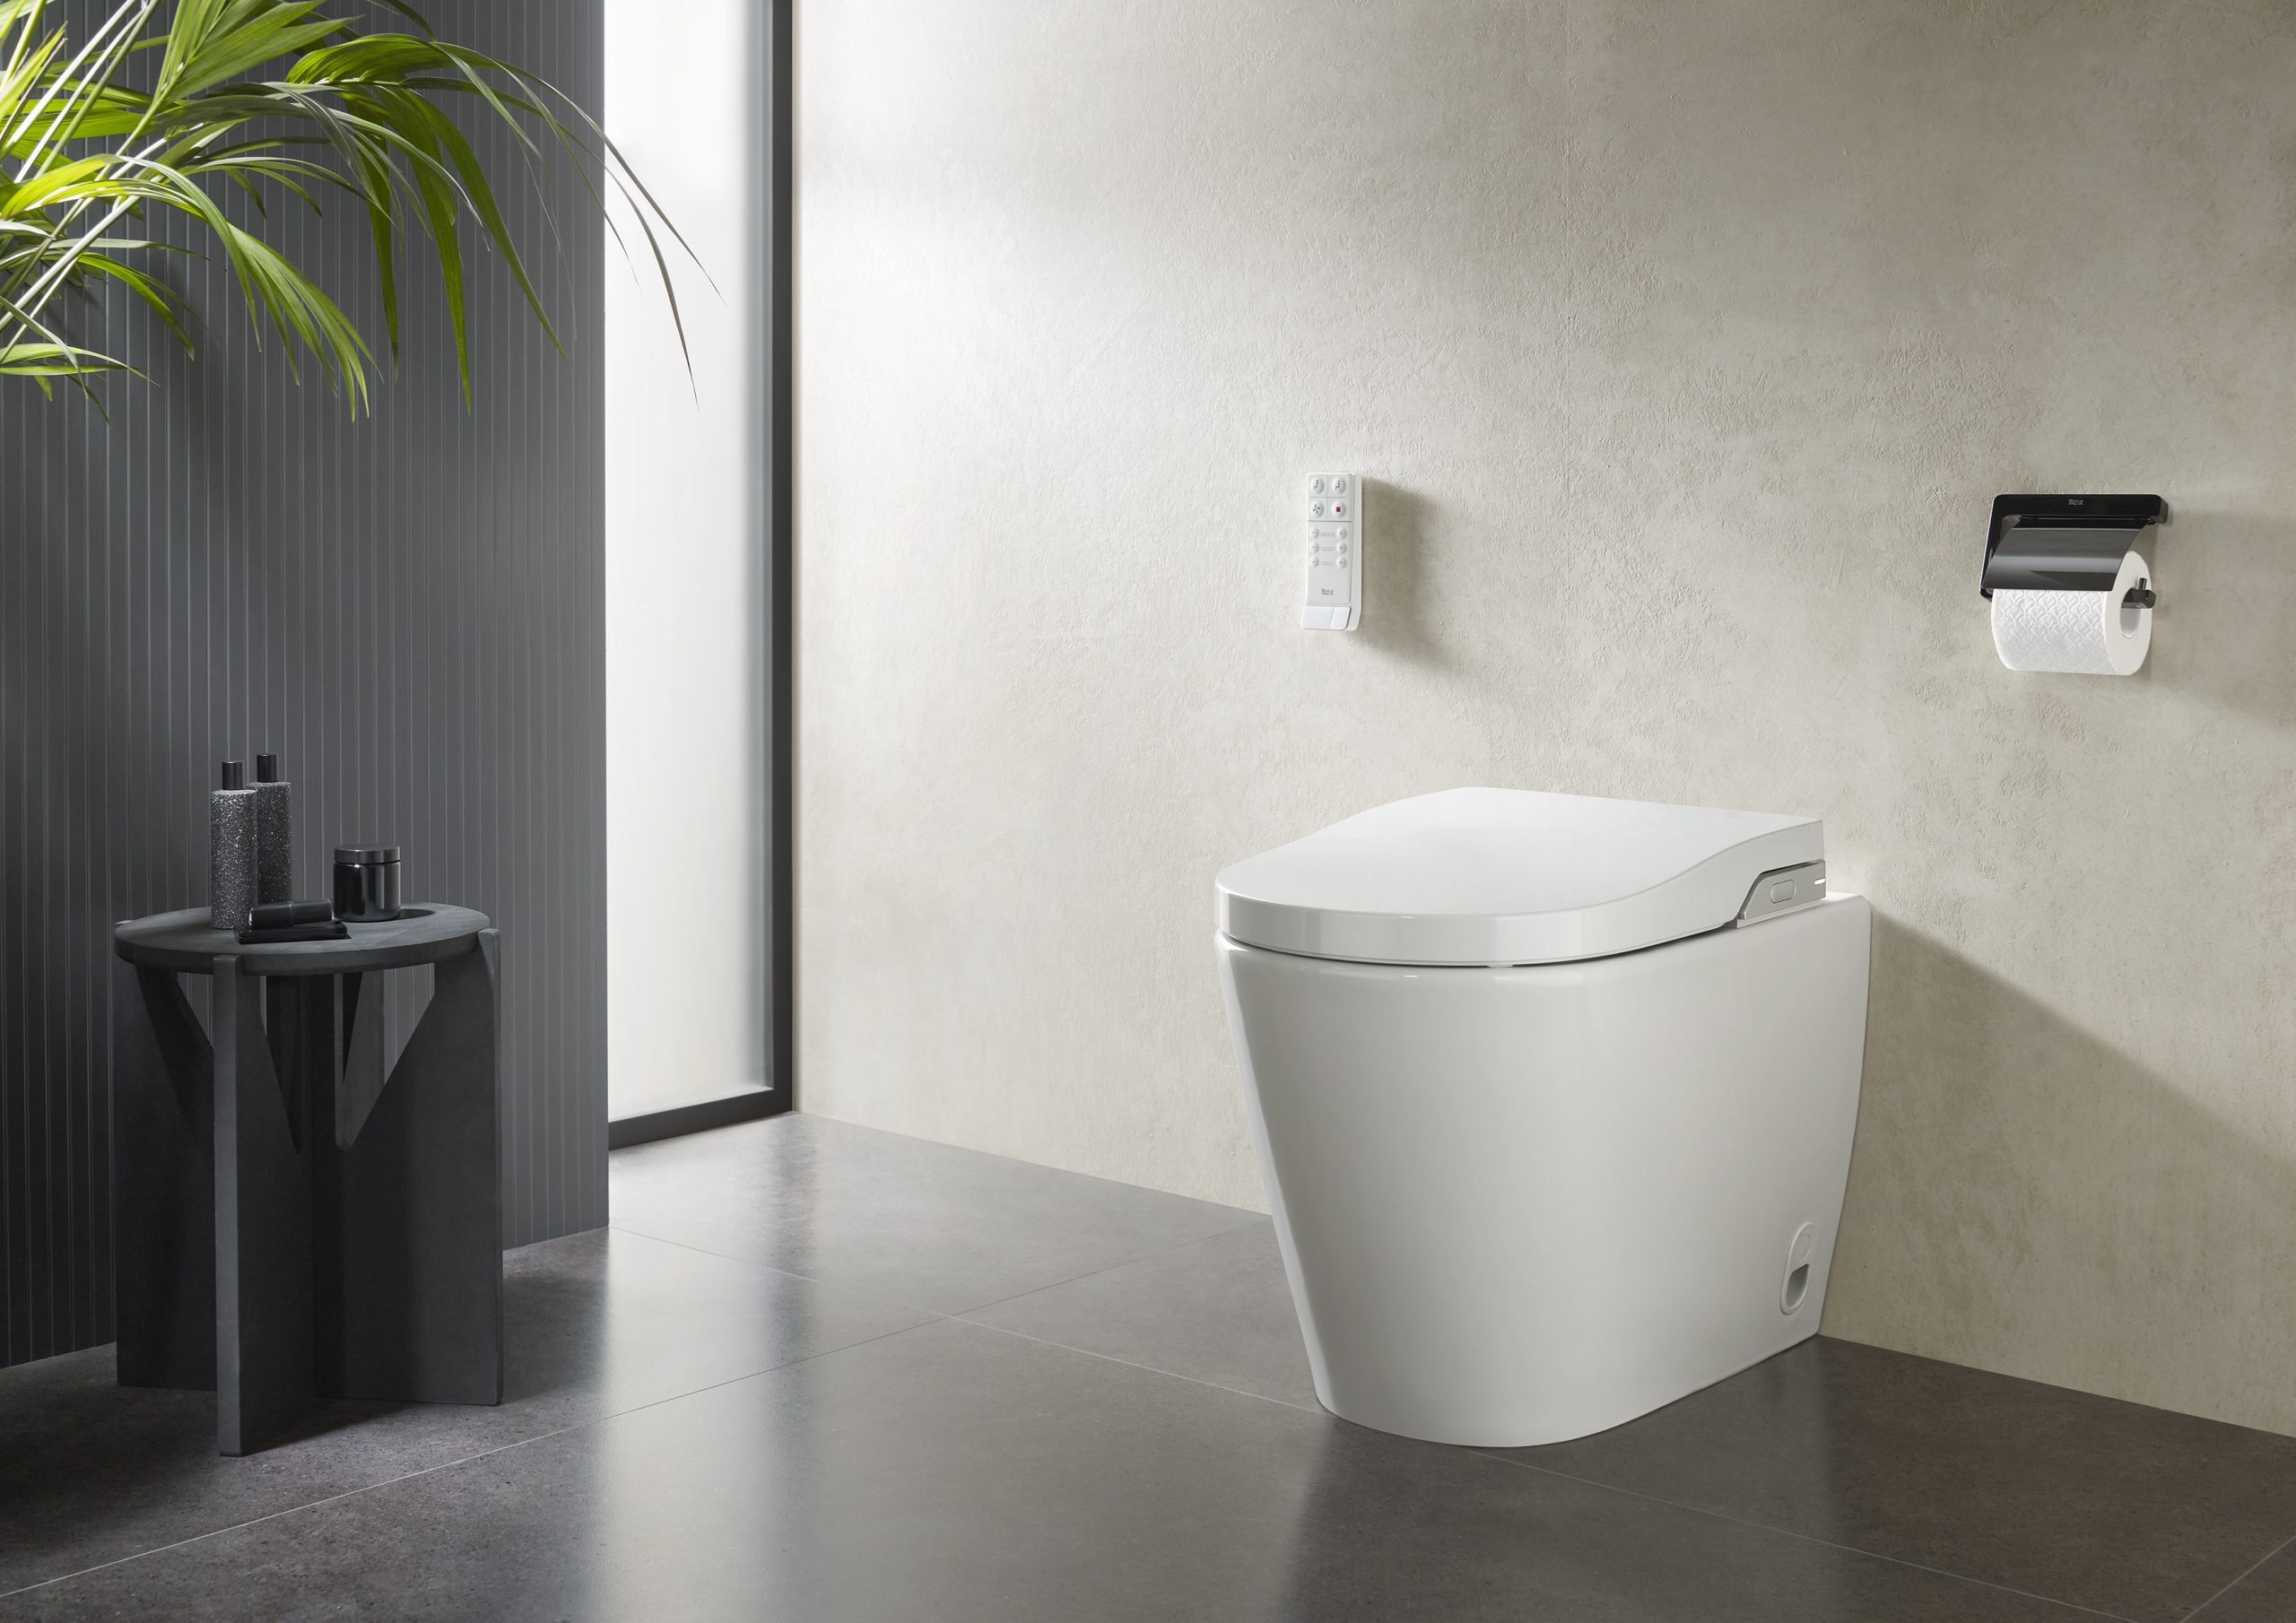 Roca innovates bathroom spaces with new toilets